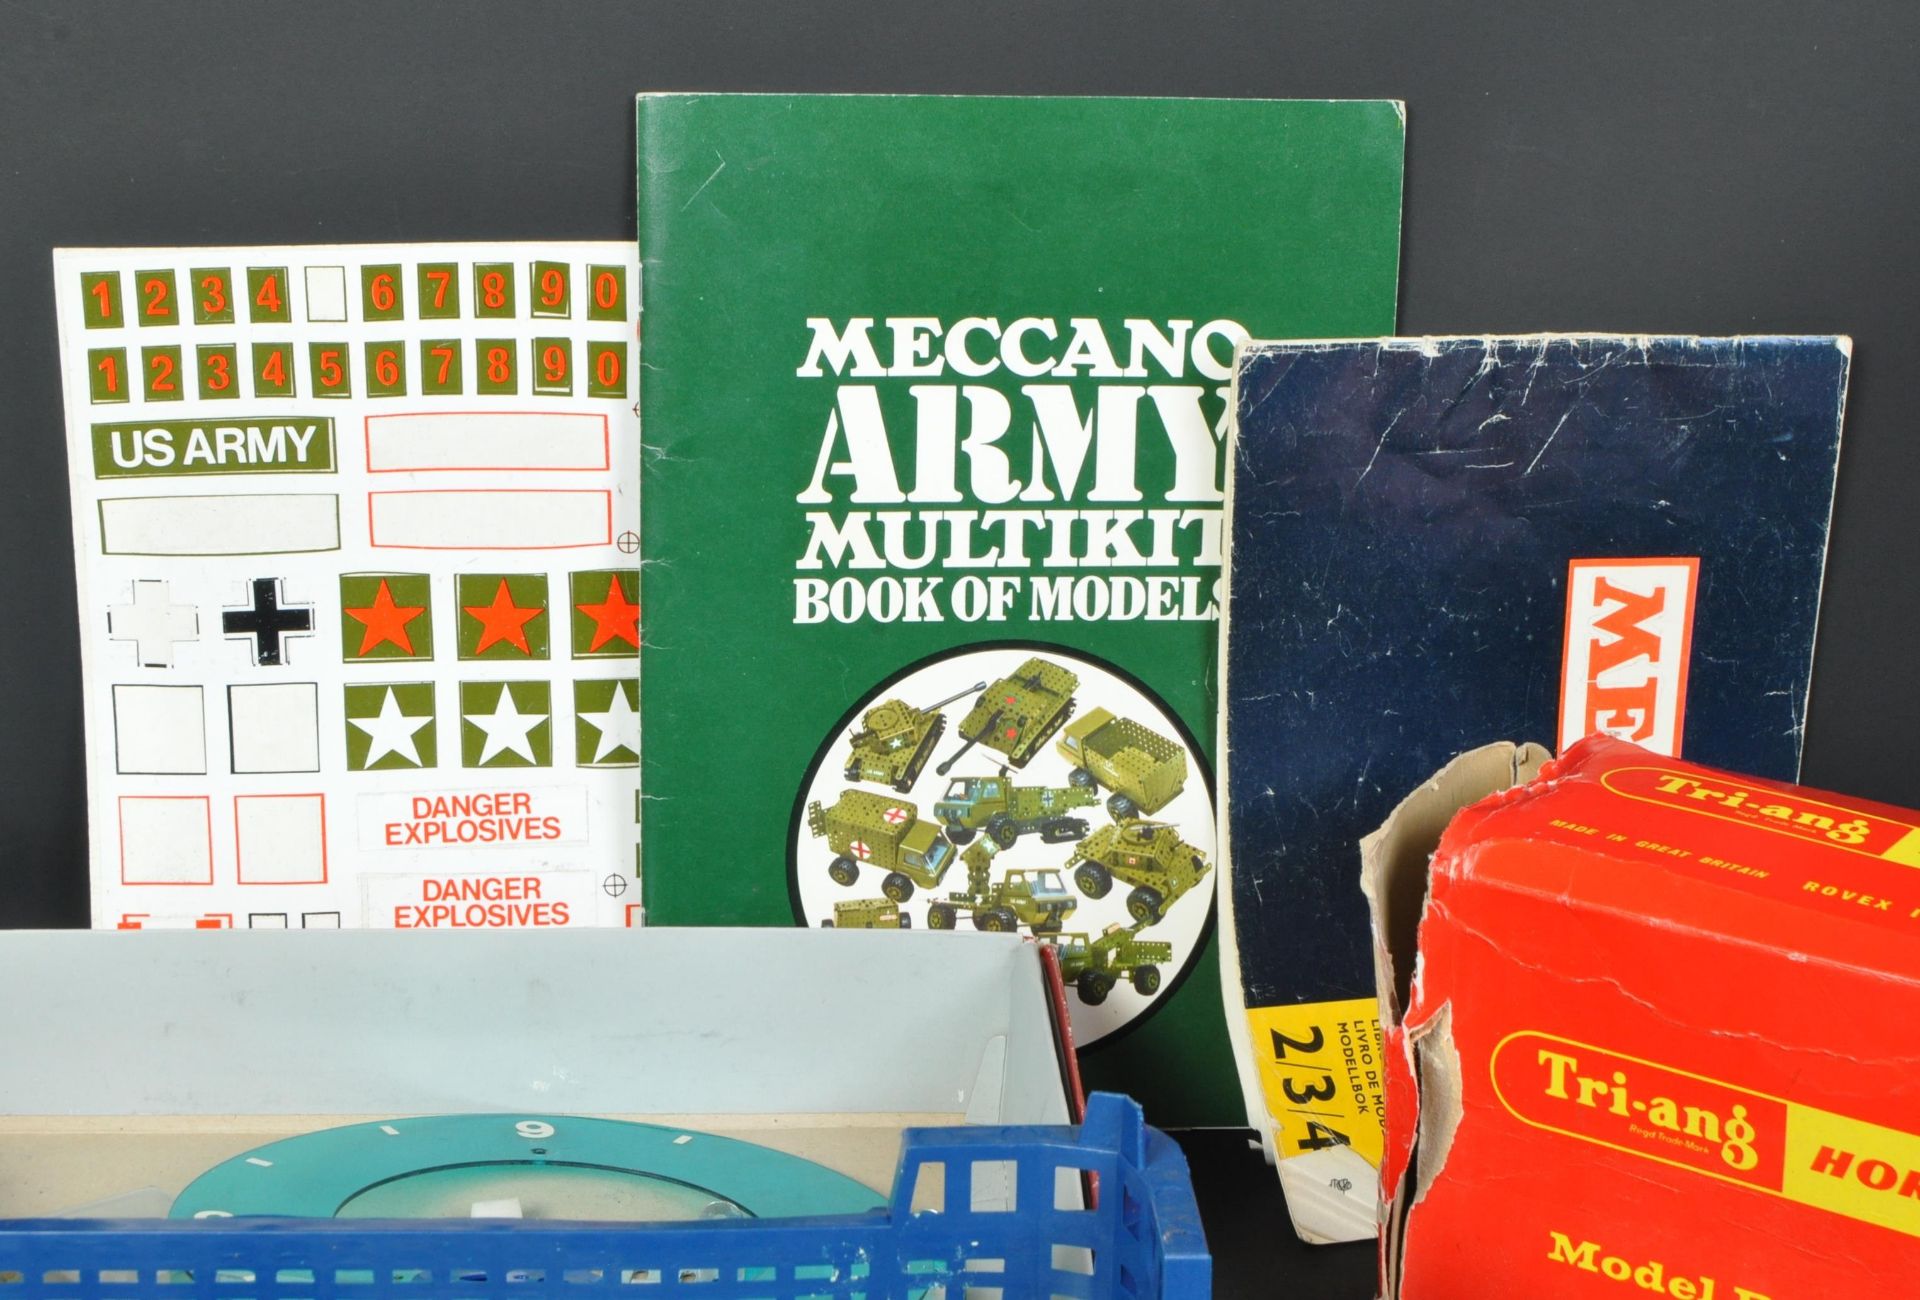 MECCANO CLOCK AND ARMY TOOL - HORNBY + TRI-ANG RAILWAY - Image 2 of 5